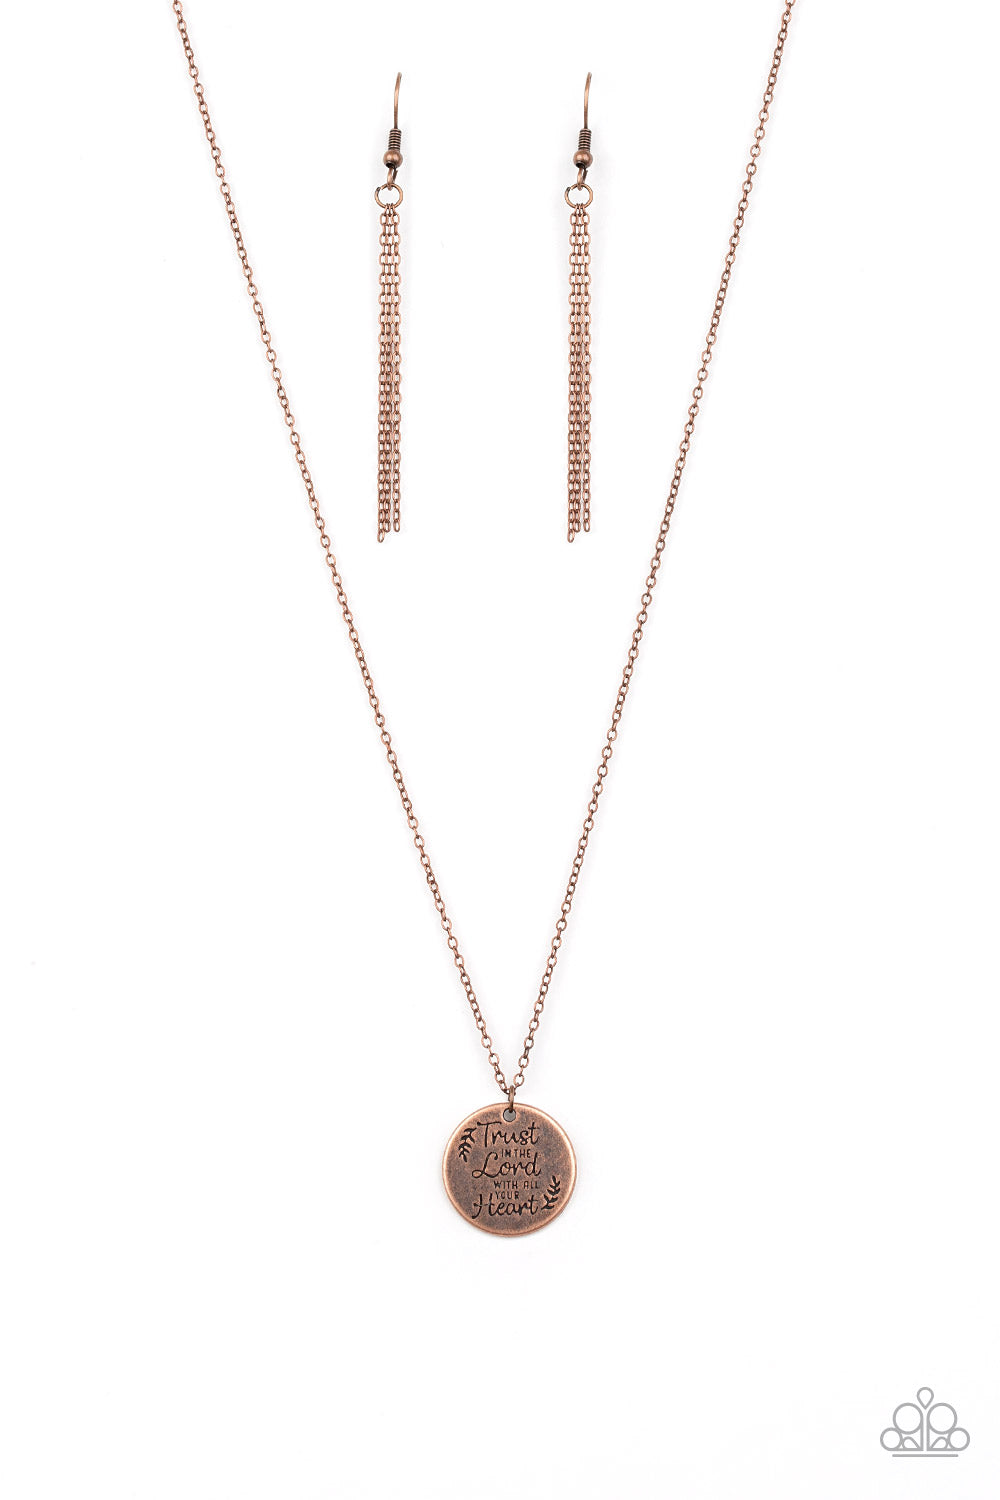 All You Need Is Trust - Copper Necklace